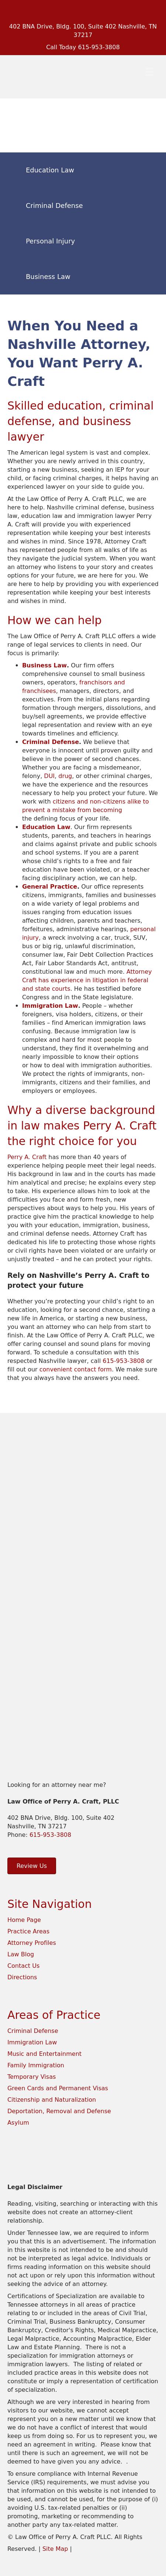 The Law Office of Perry A. Craft, PLLC - Nashville TN Lawyers